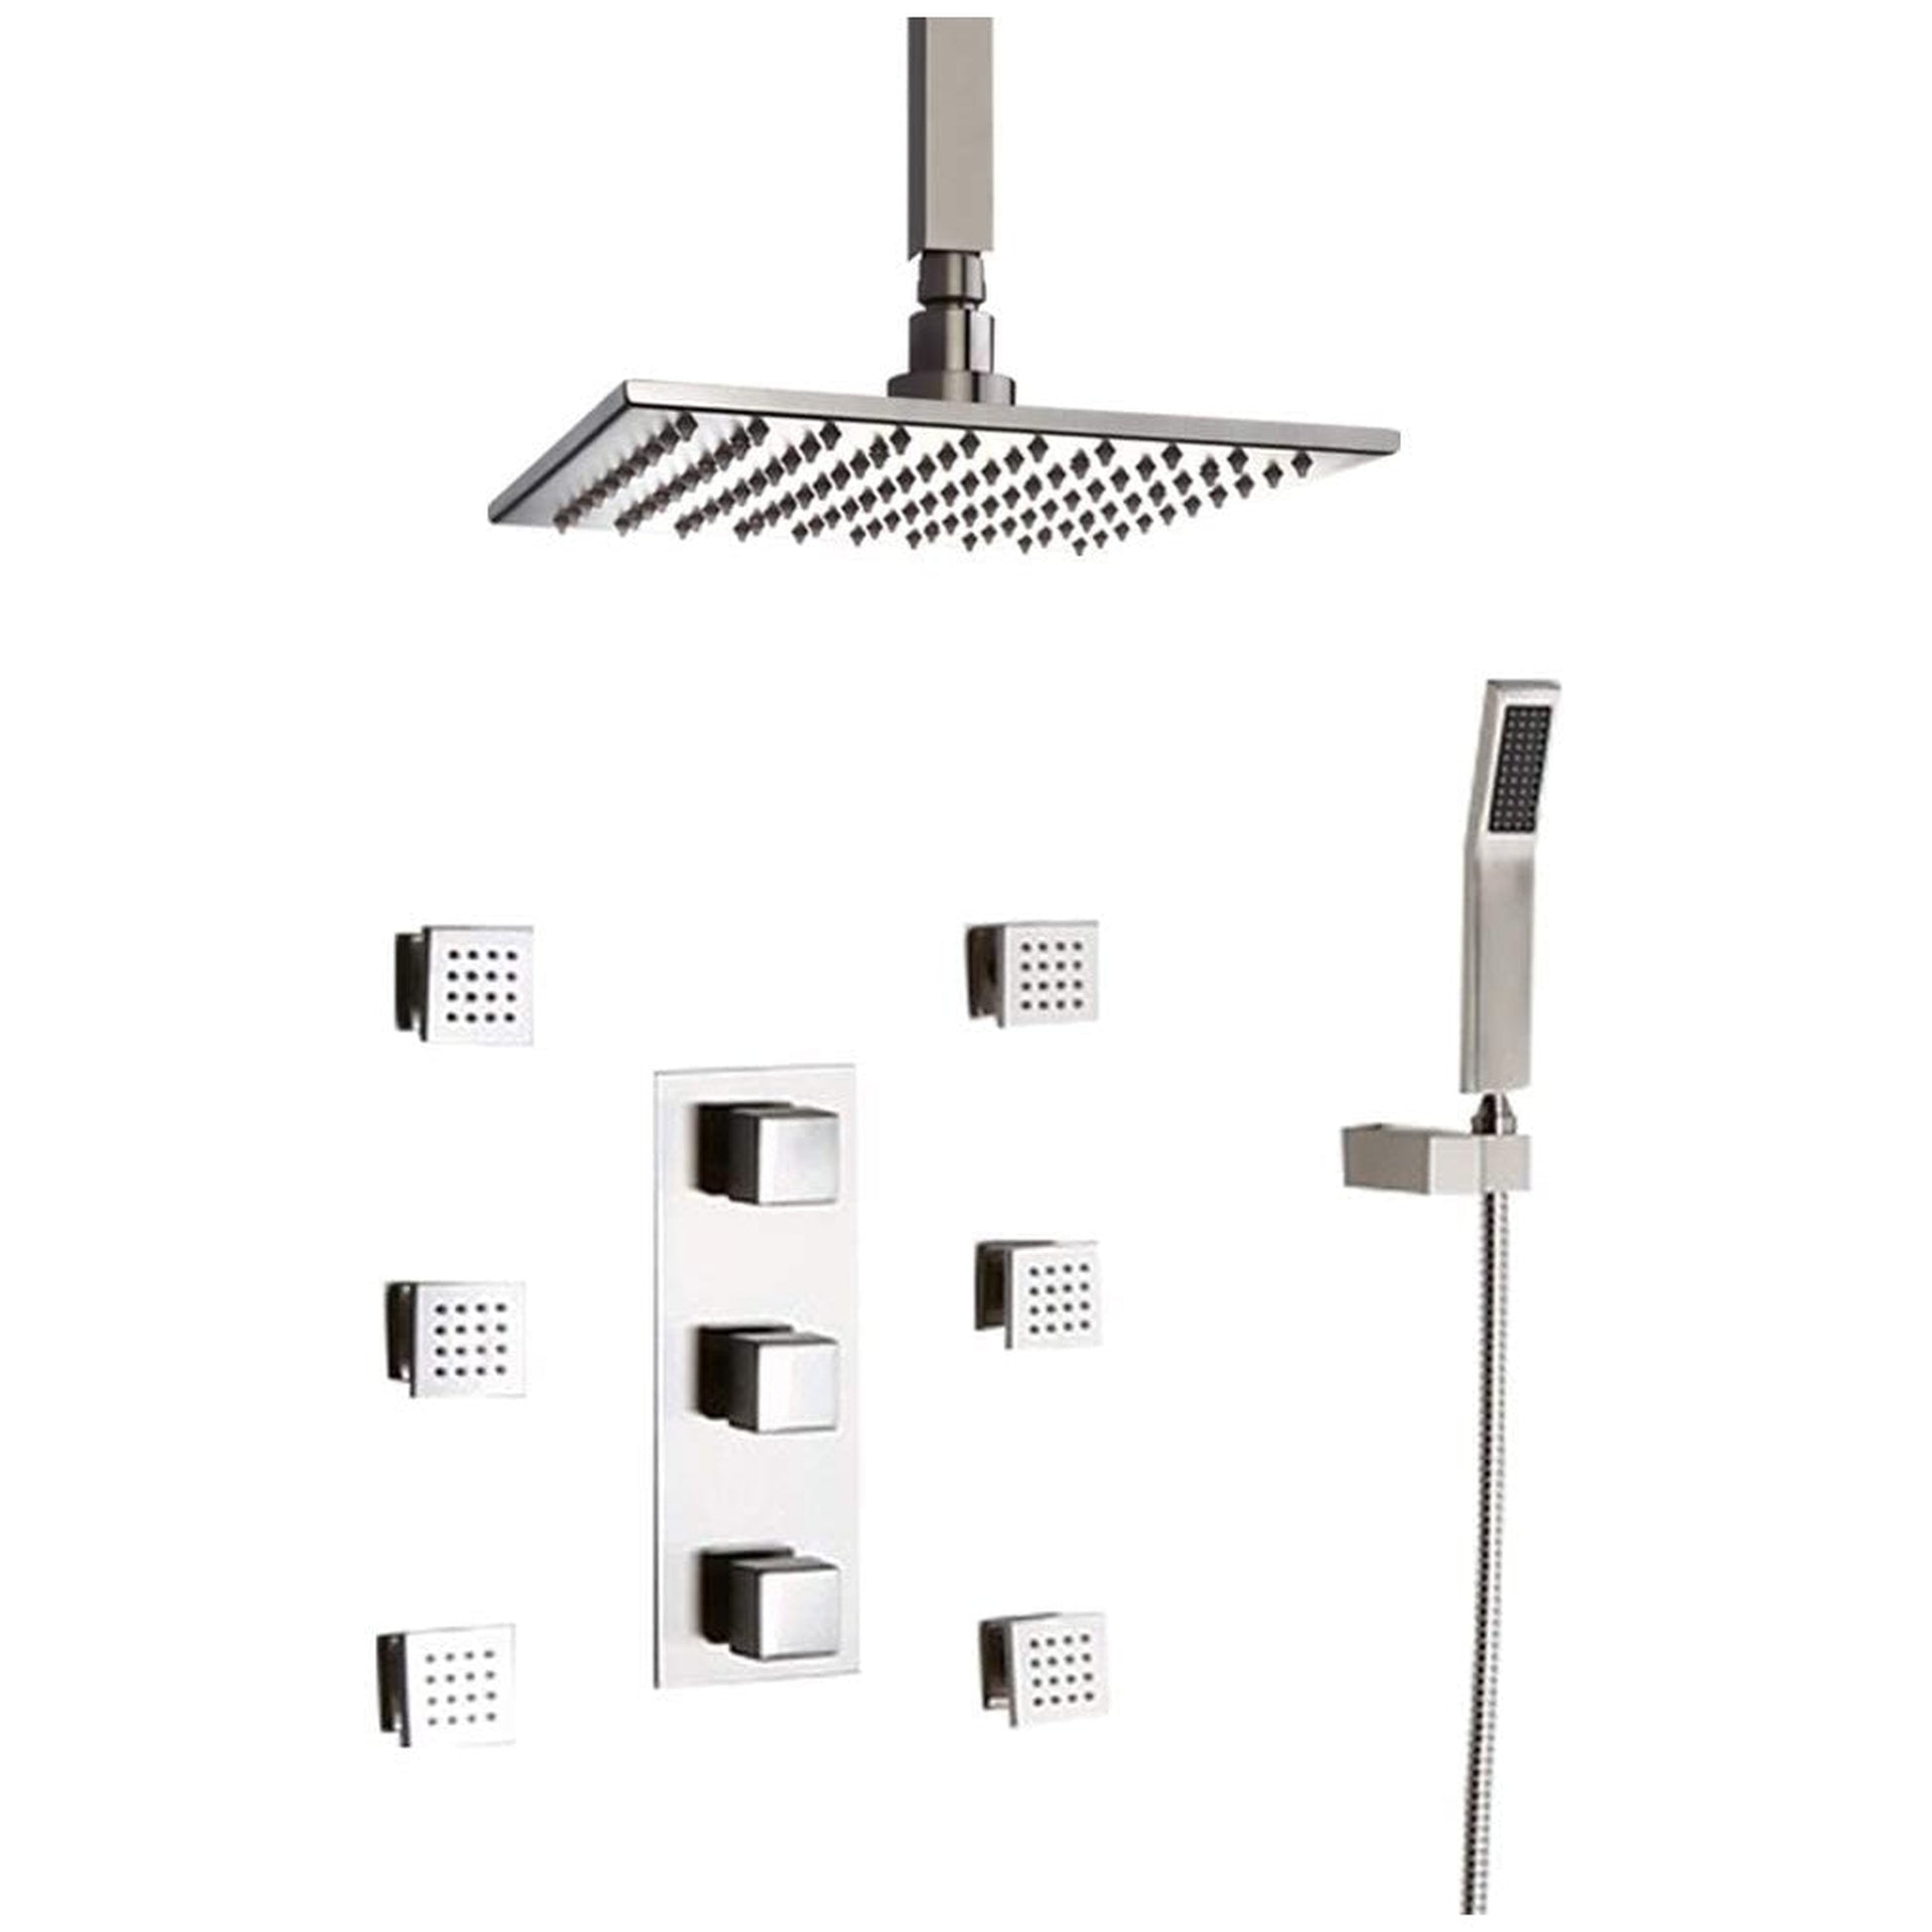 Fontana 16" Chrome Square Ceiling Mounted Thermostatic Rainfall Shower Set With 6-Jet Body Sprays and Hand Shower